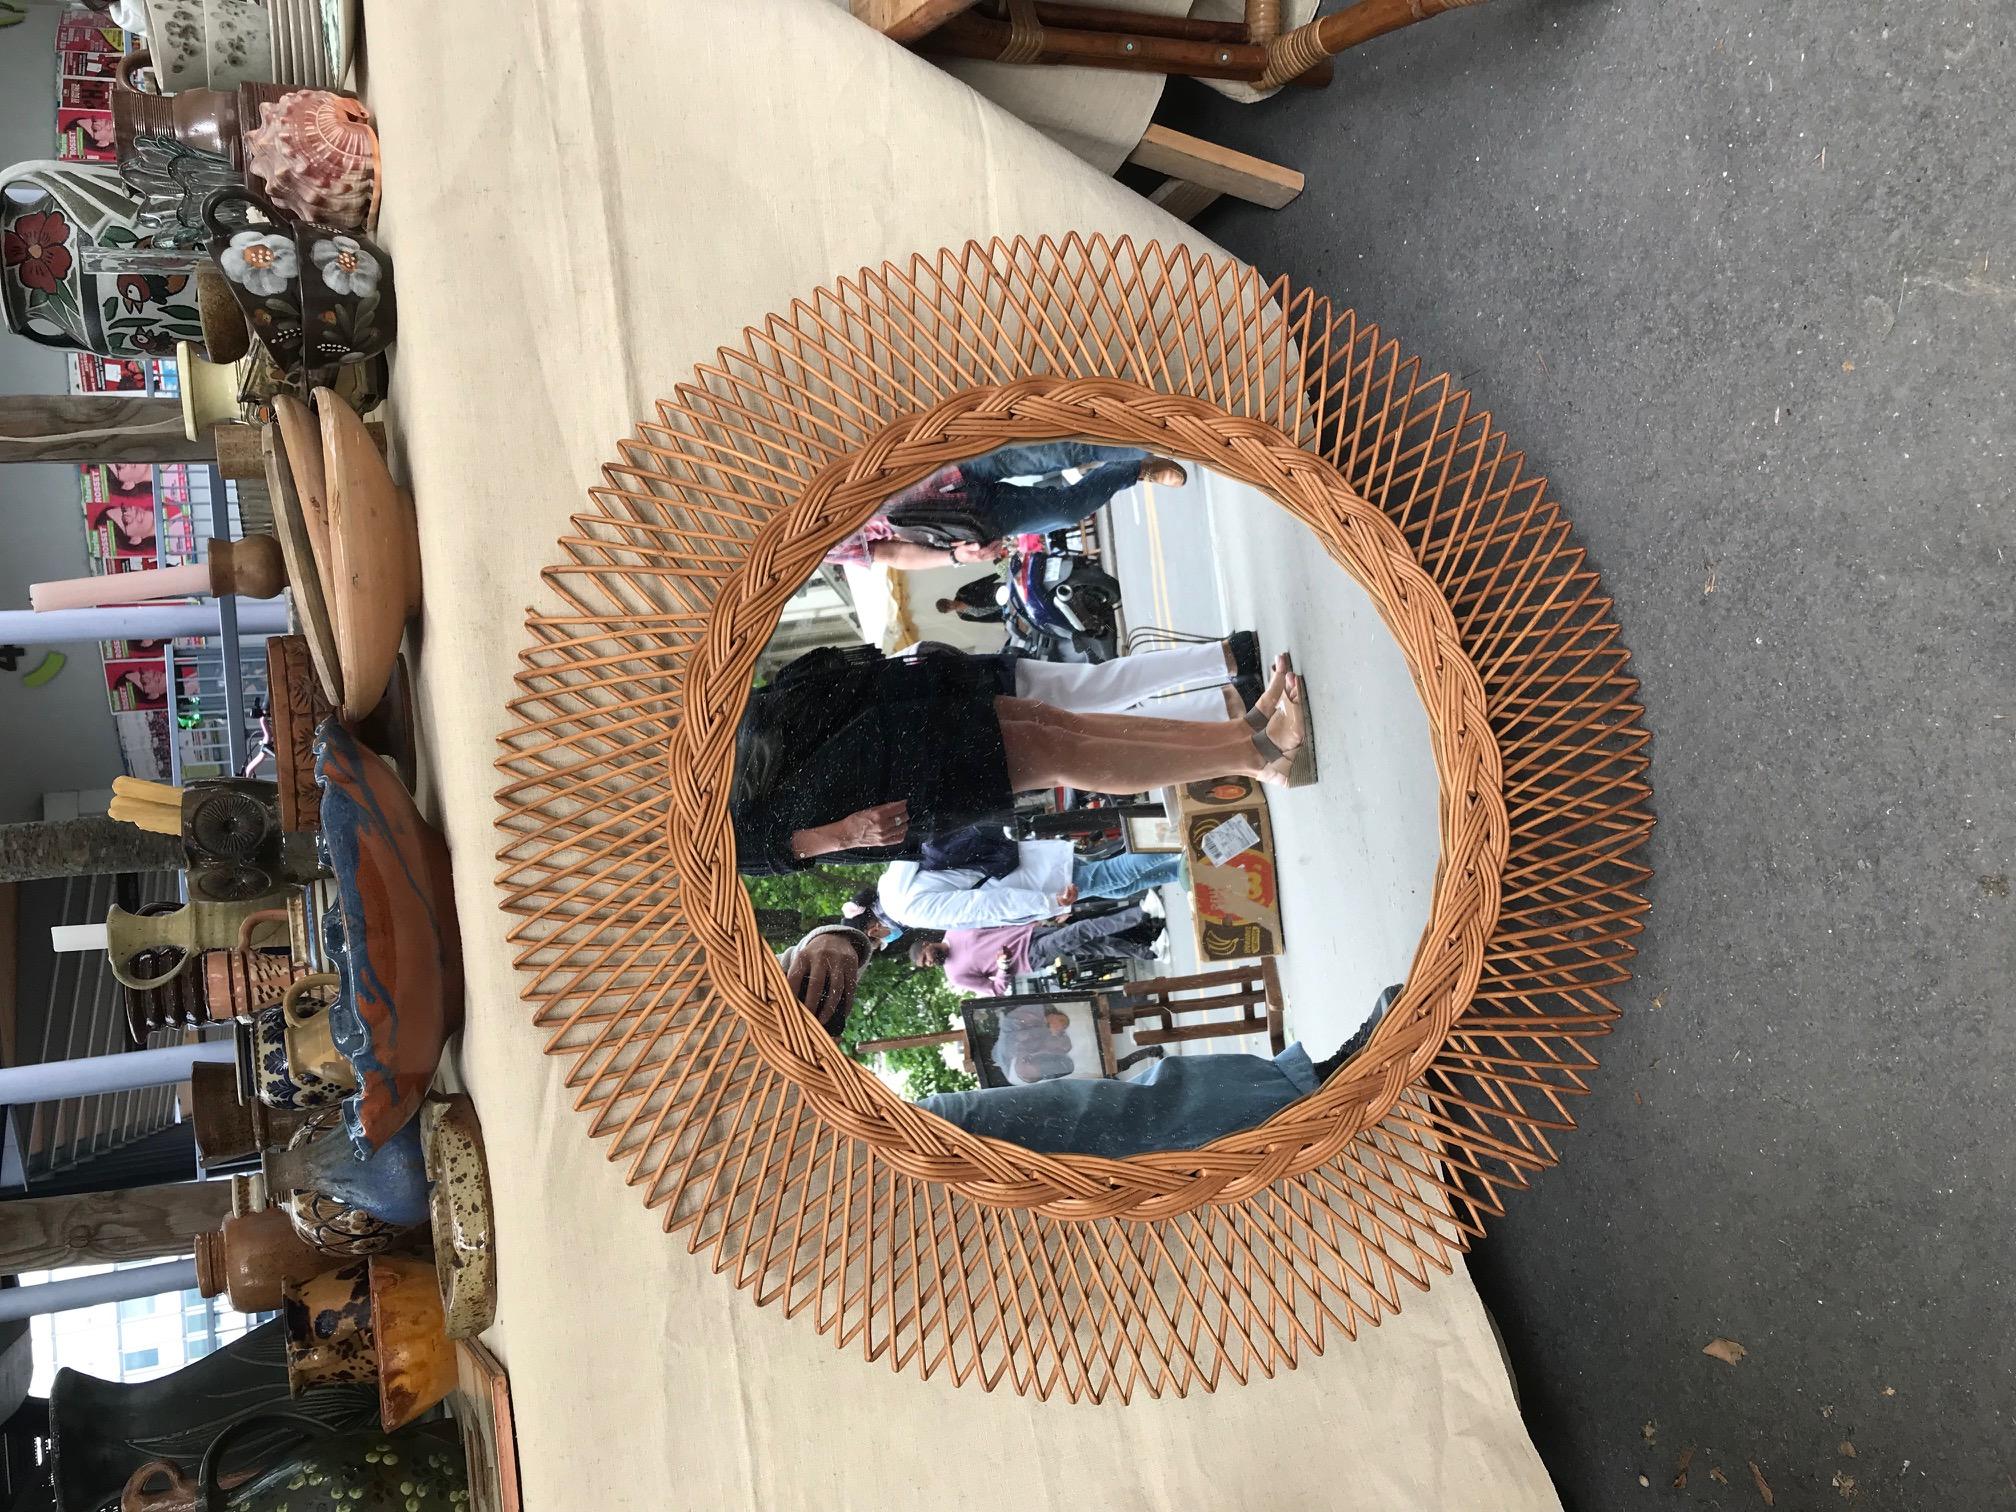 Rare large sun rattan mirror in very good state perfect for a living room, a bedroom or even a bathroom. It gives a natural organic atmosphere that fit with any style.